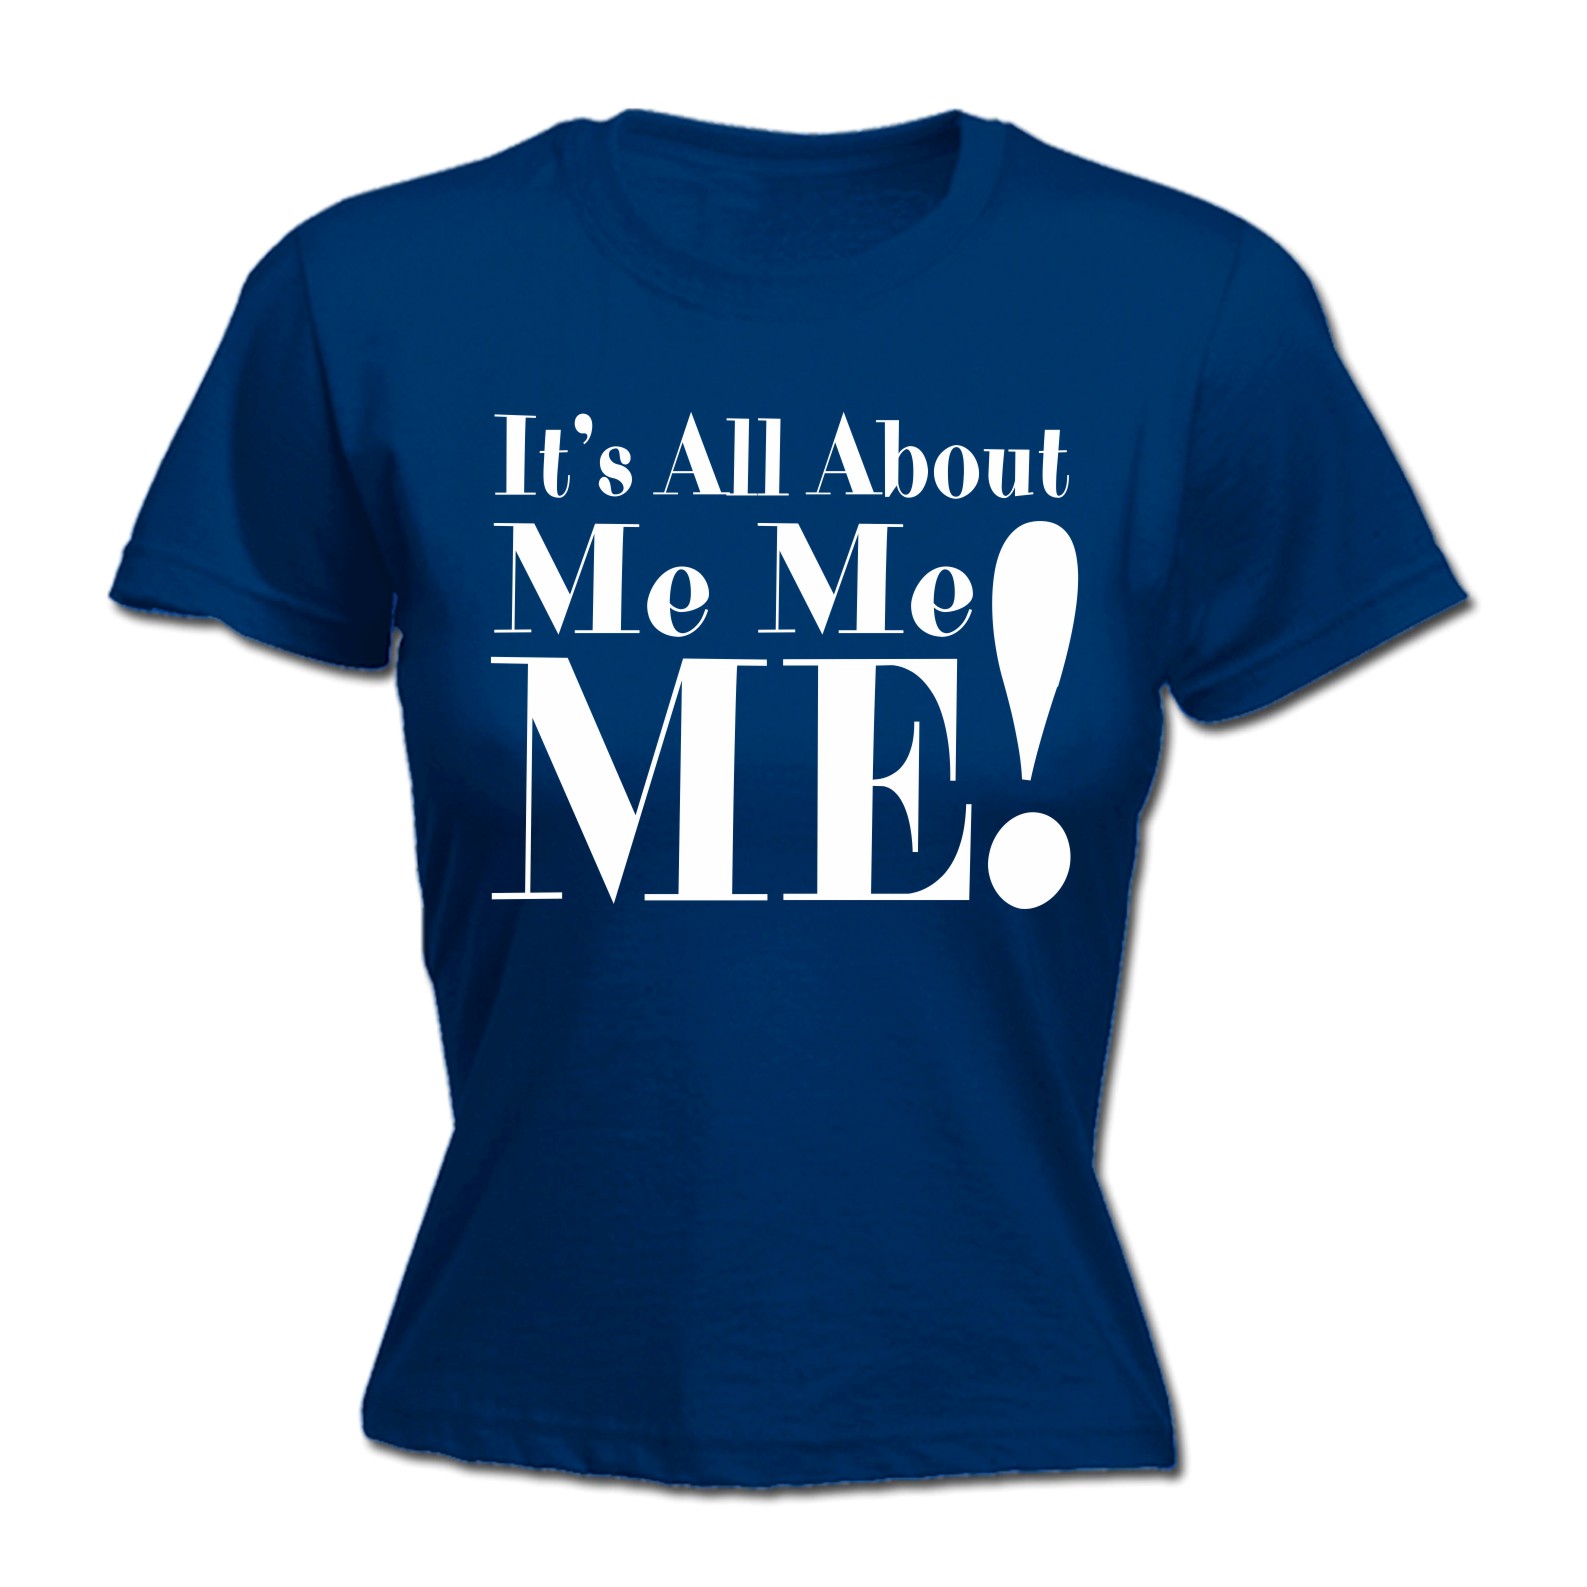 Womens Its All About Me Funny Joke Comedy Cool FITTED TSHIRT birthday